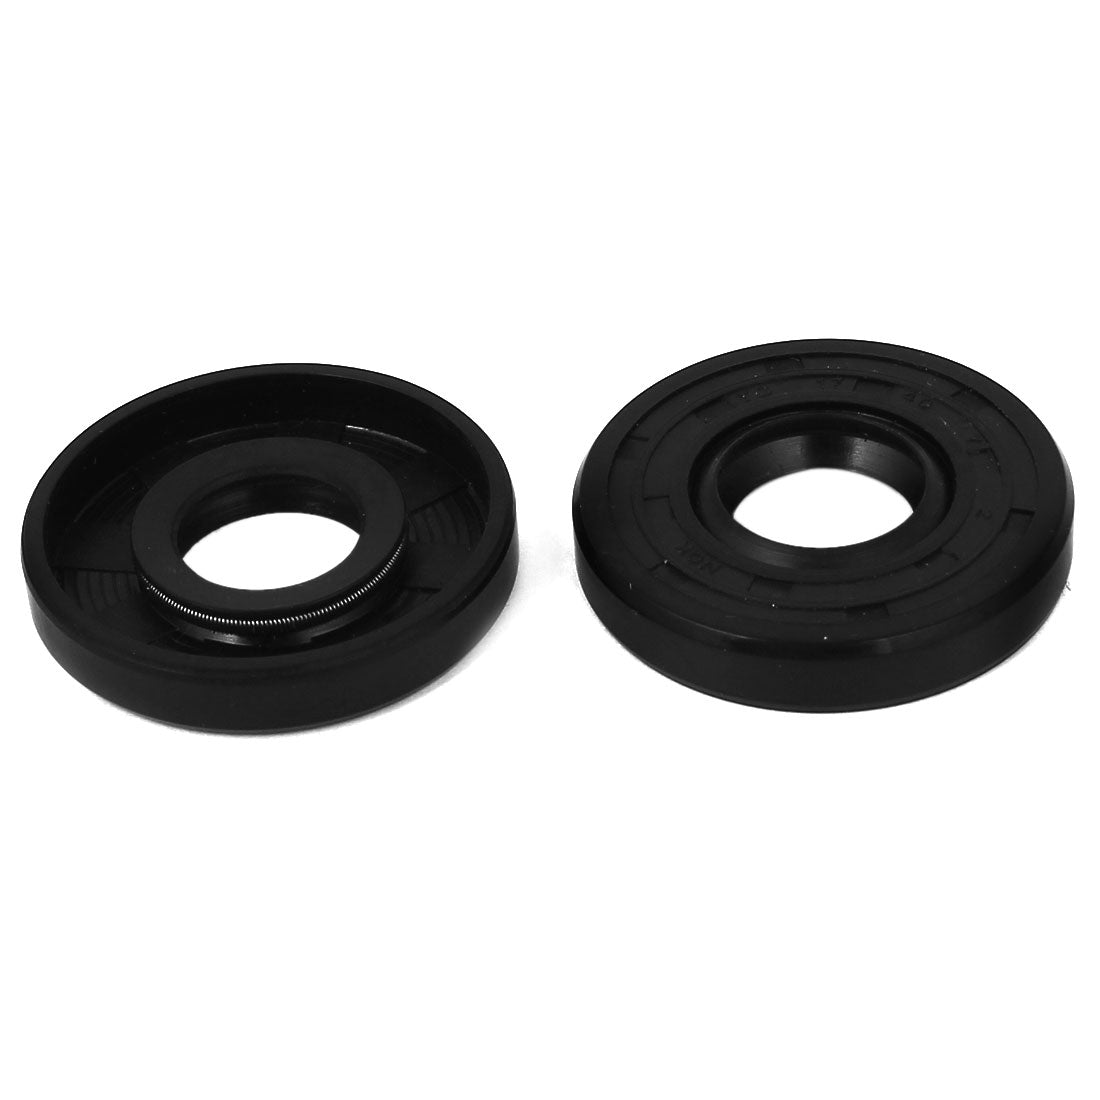 uxcell Uxcell 17mm x 40mm x 7mm Rubber Oil Seal Sealing Ring Gasket Washer Black 2 Pcs